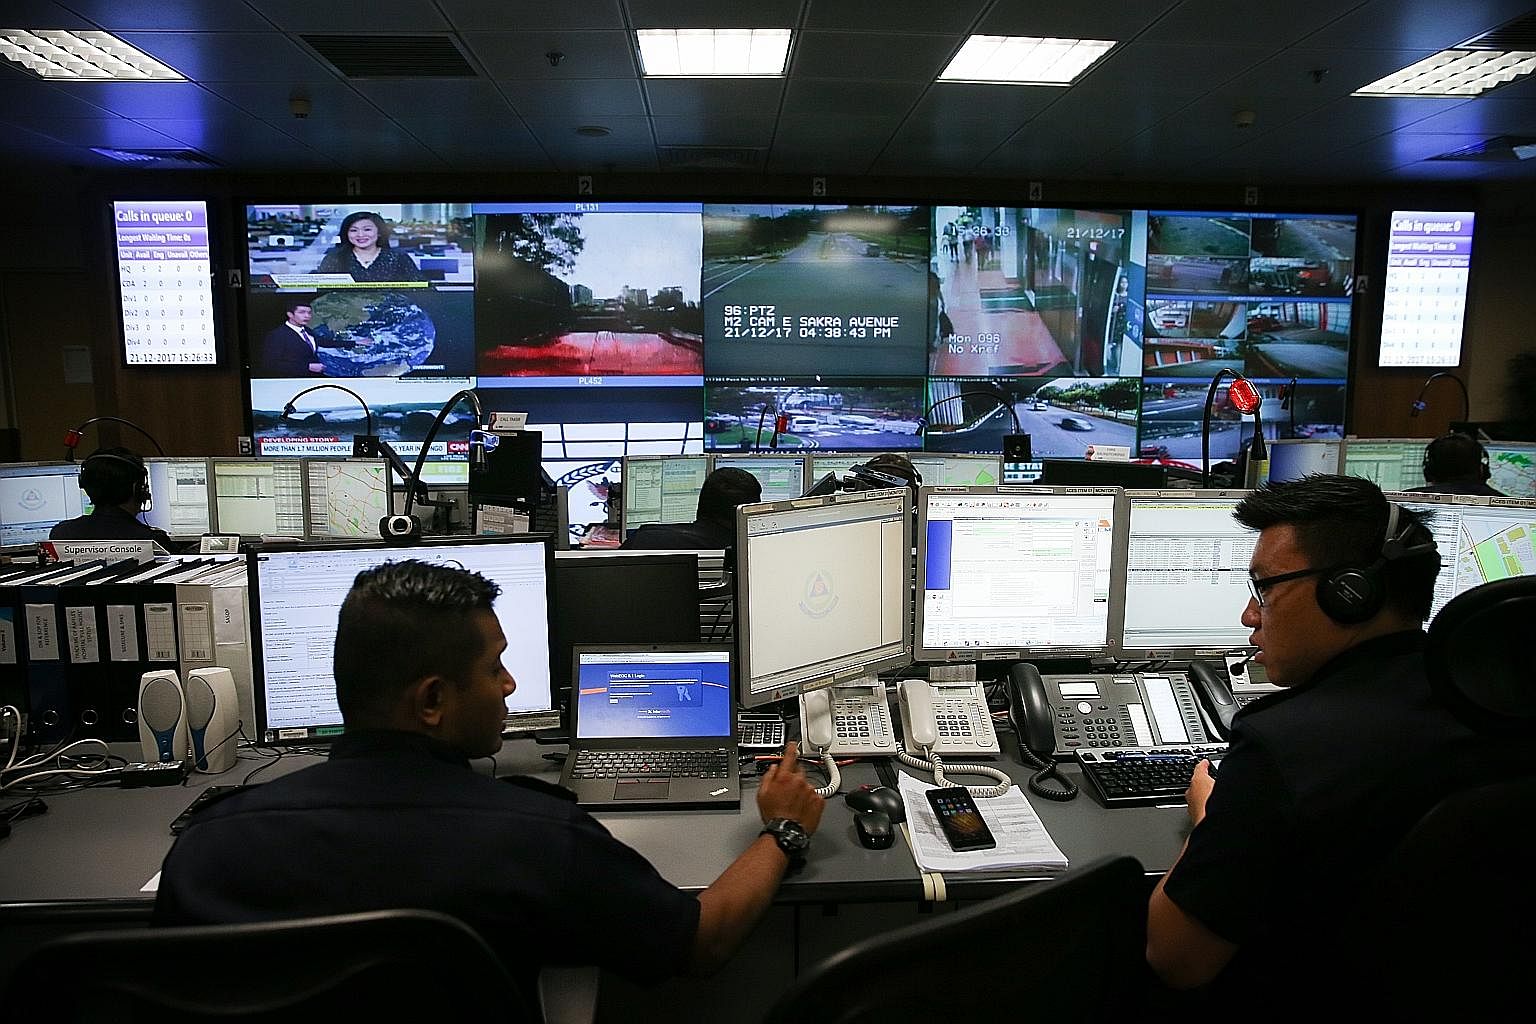 The SCDF Operations Centre is housed in a room barely the size of a tennis court and has a panel of video screens on the wall showing footage from security cameras around the island. The staff who man the centre adhere to strict timing targets.